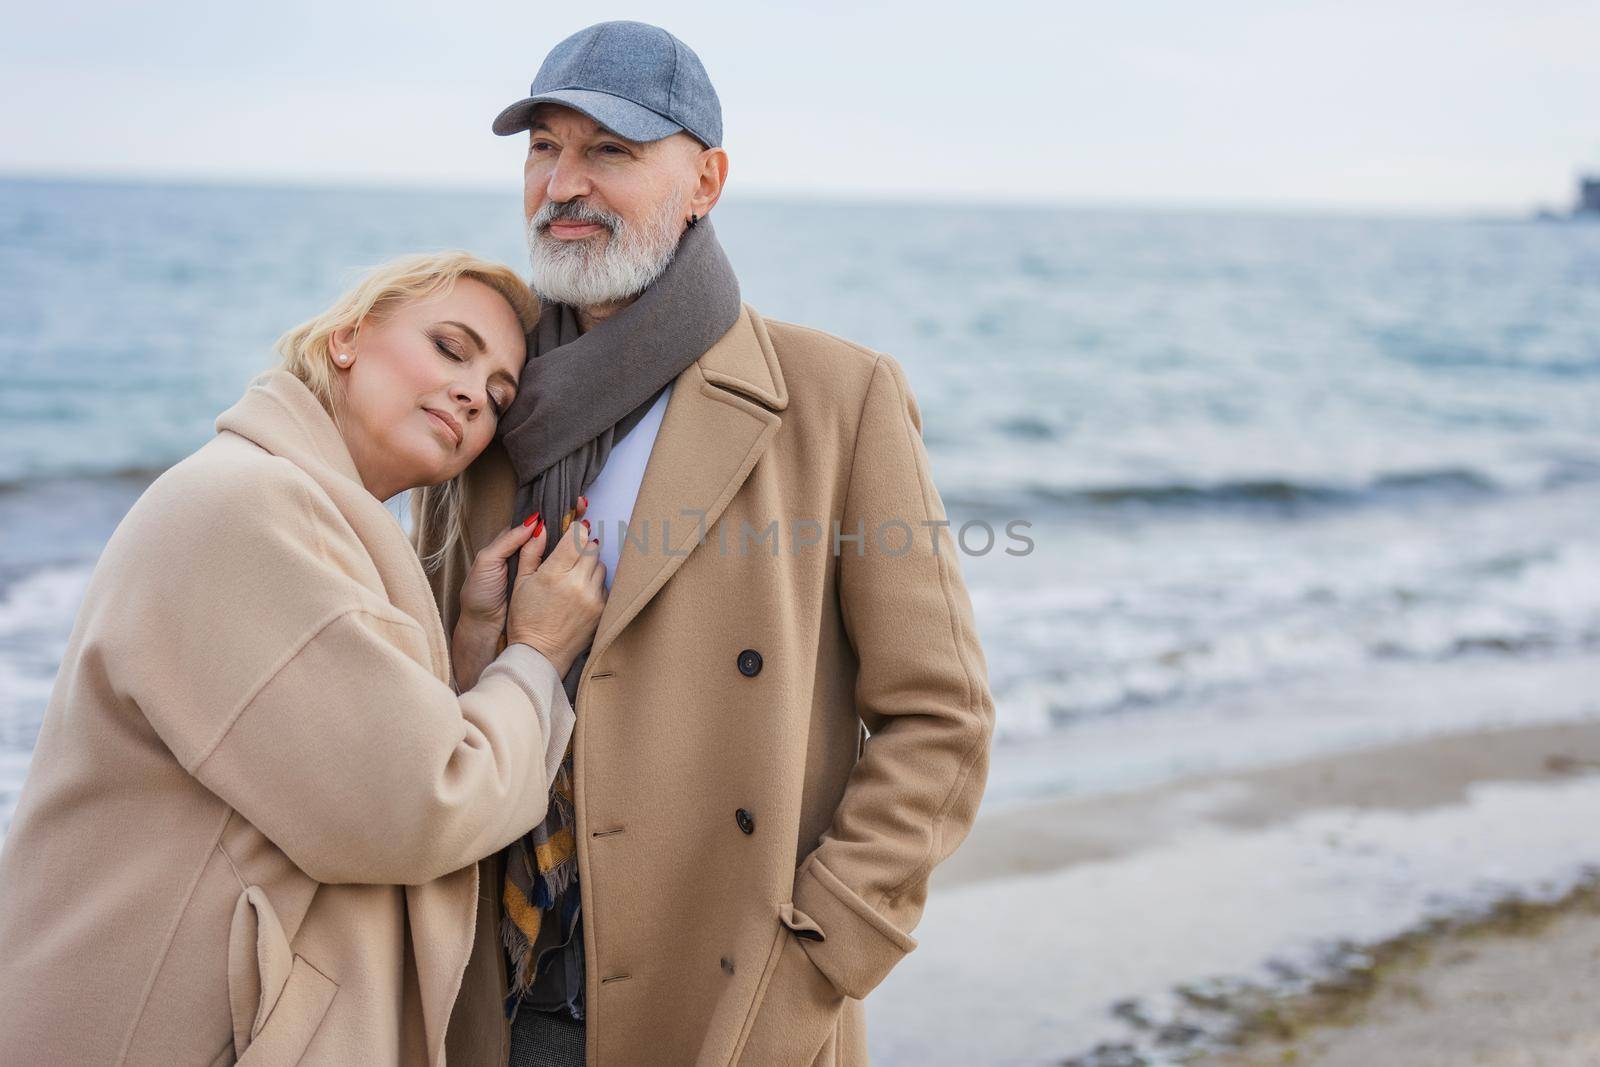 Aged couple walking along the beach against the background of the sea